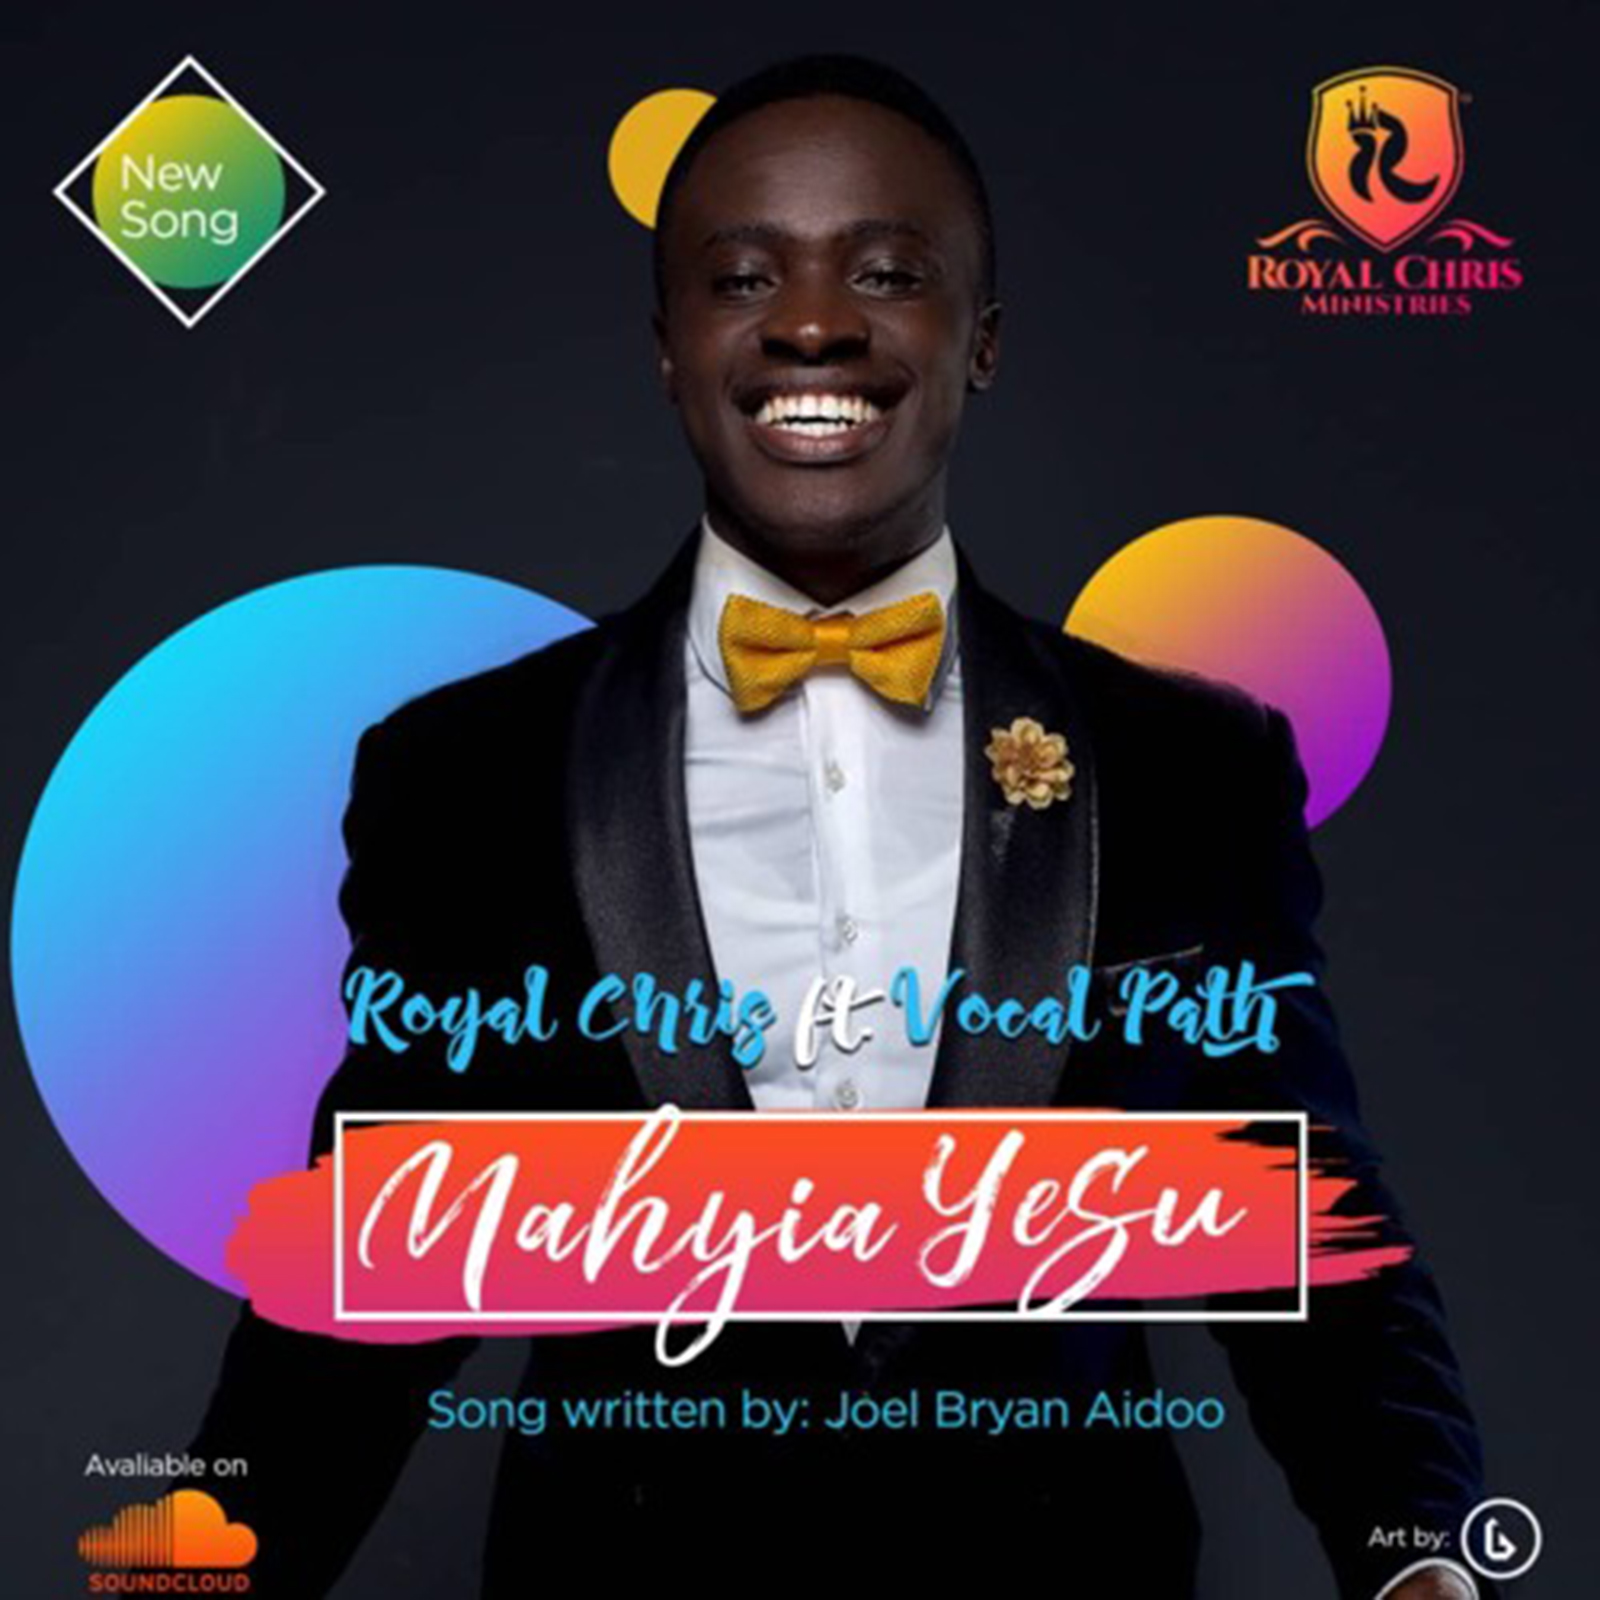 Mehyia Yesu by Royal Chris feat. Vocal Path